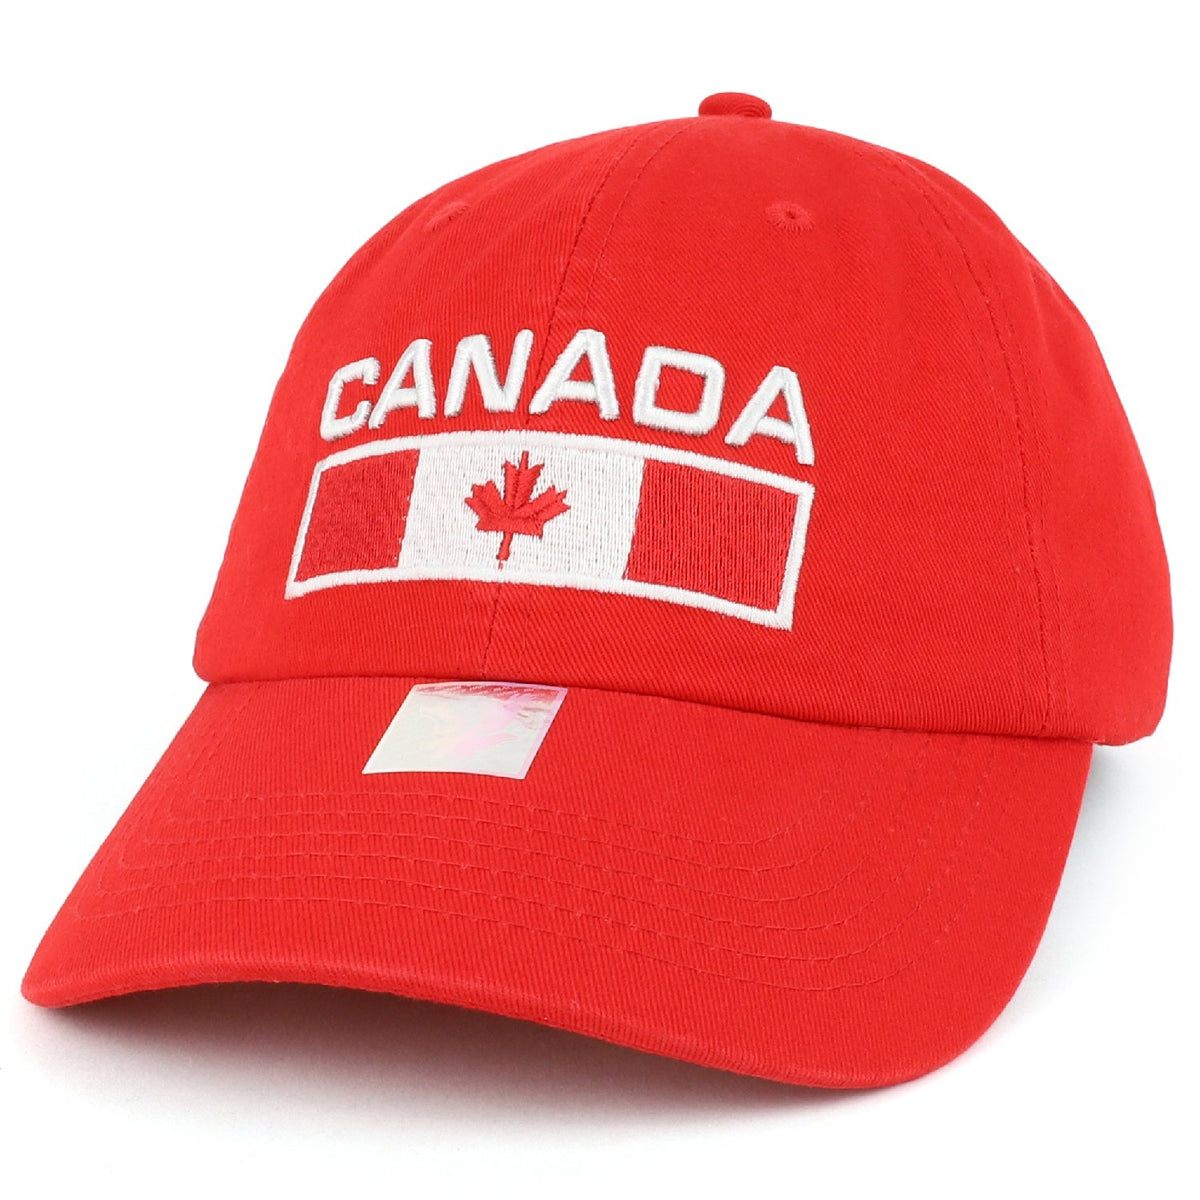 Armycrew Canada Text and Flag Embroidered Cotton Soft Crown Dad Hat